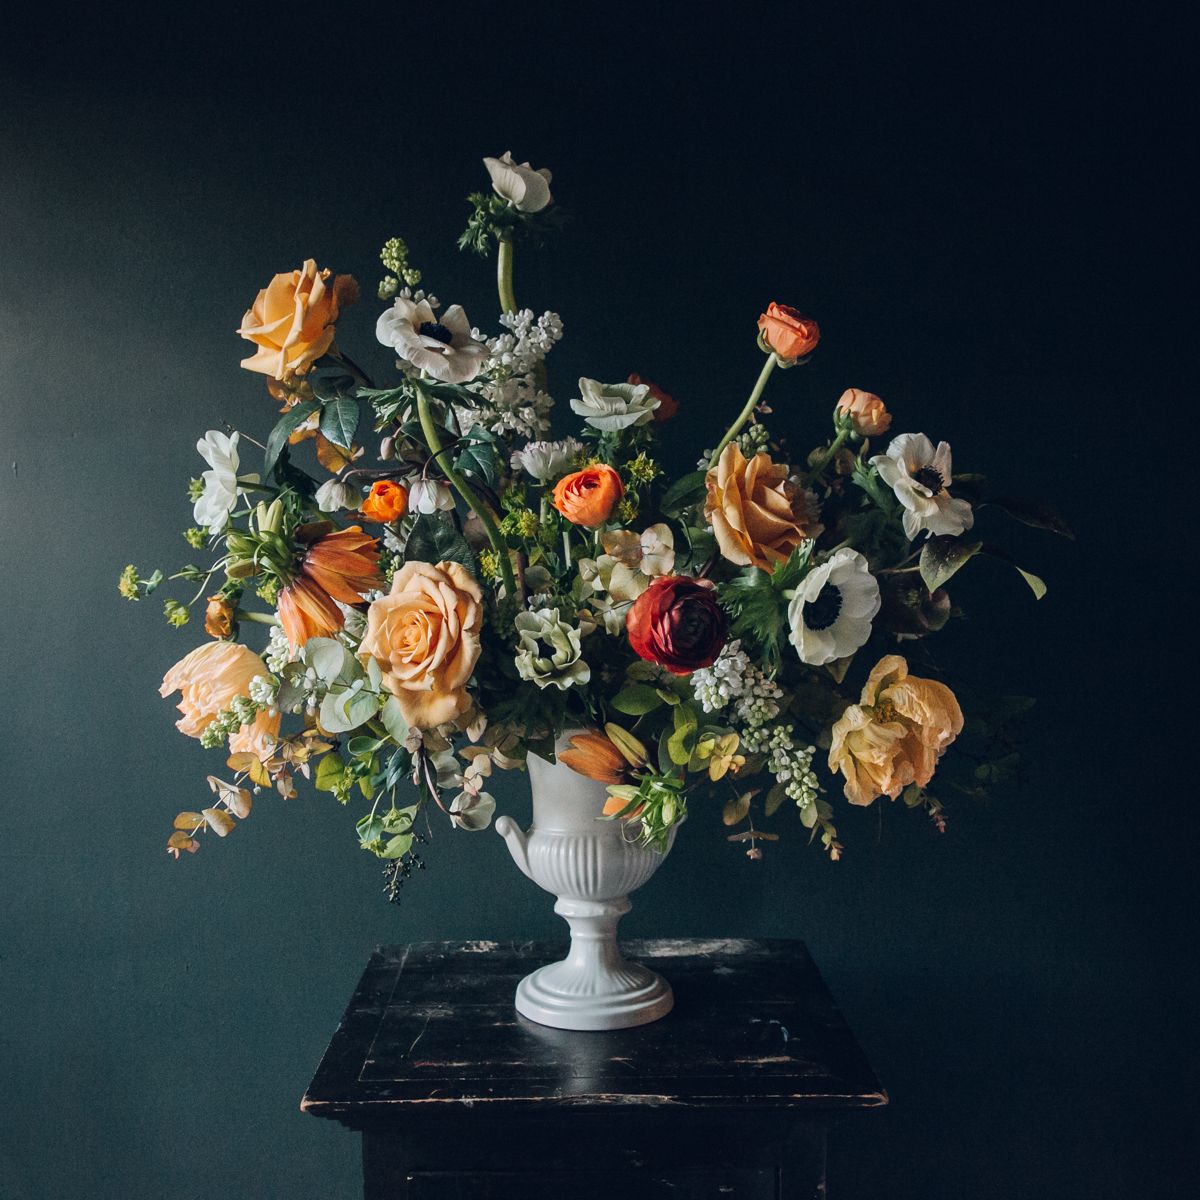 Inspiring floral Instagram account Swallows and Damsons